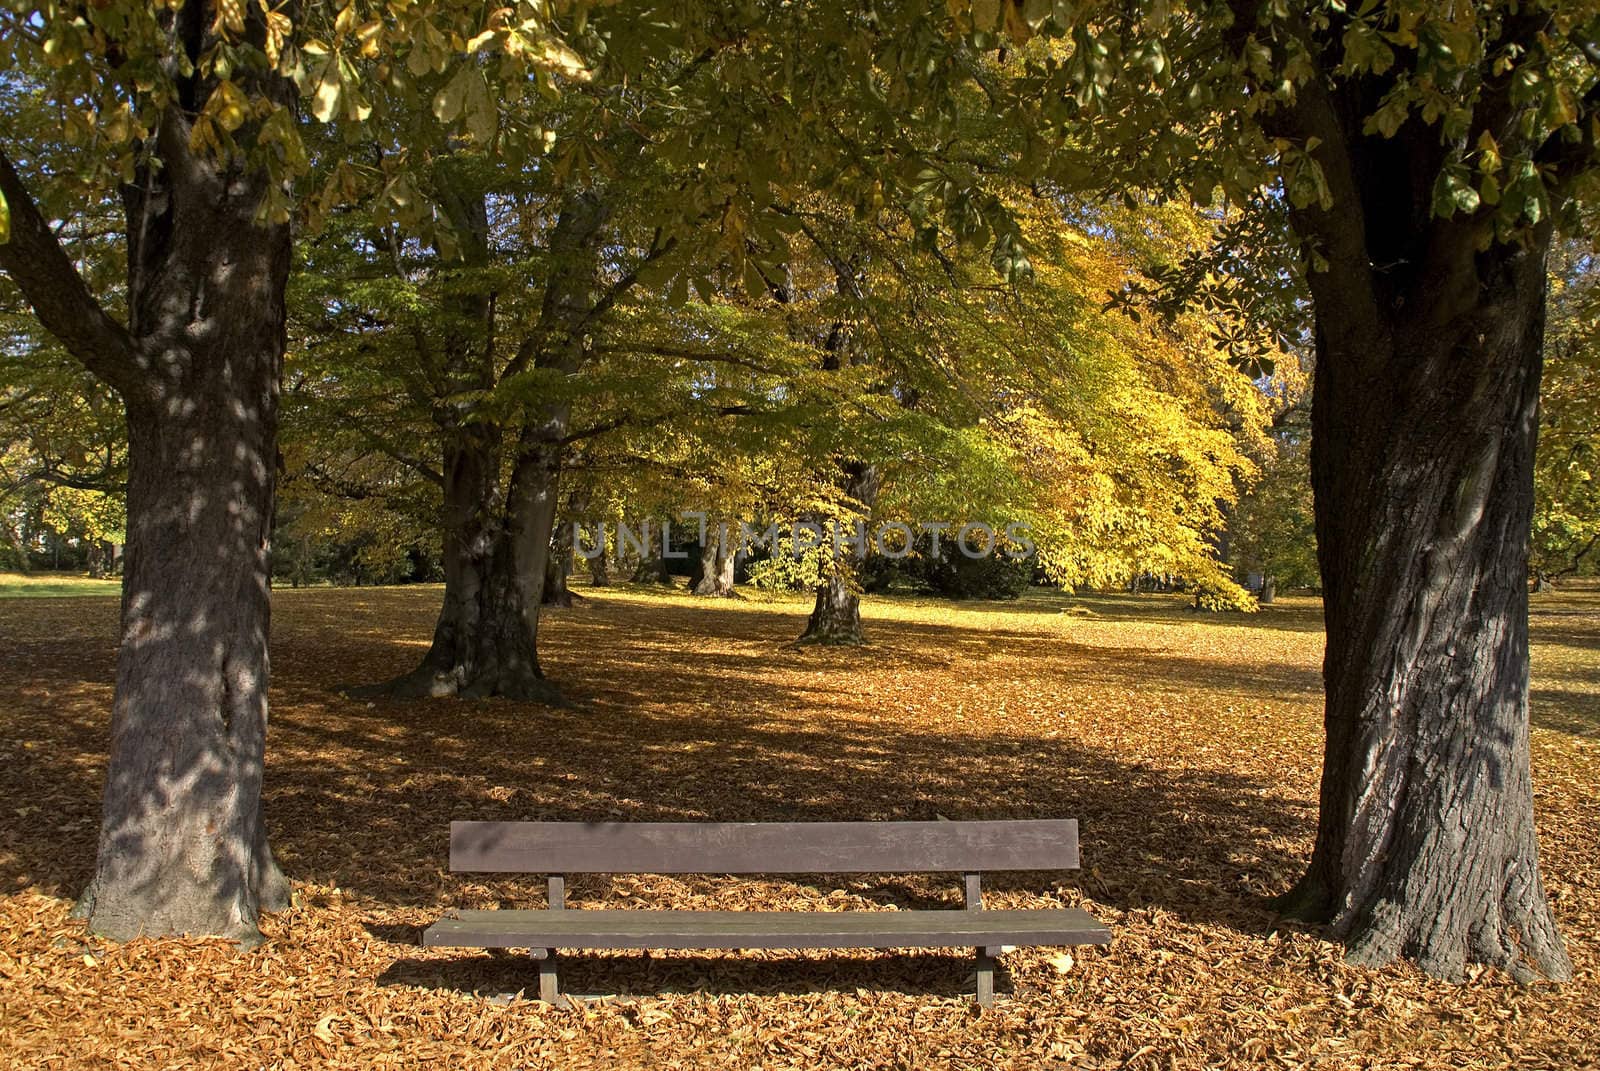 Park bench in the autumn sun-drenched